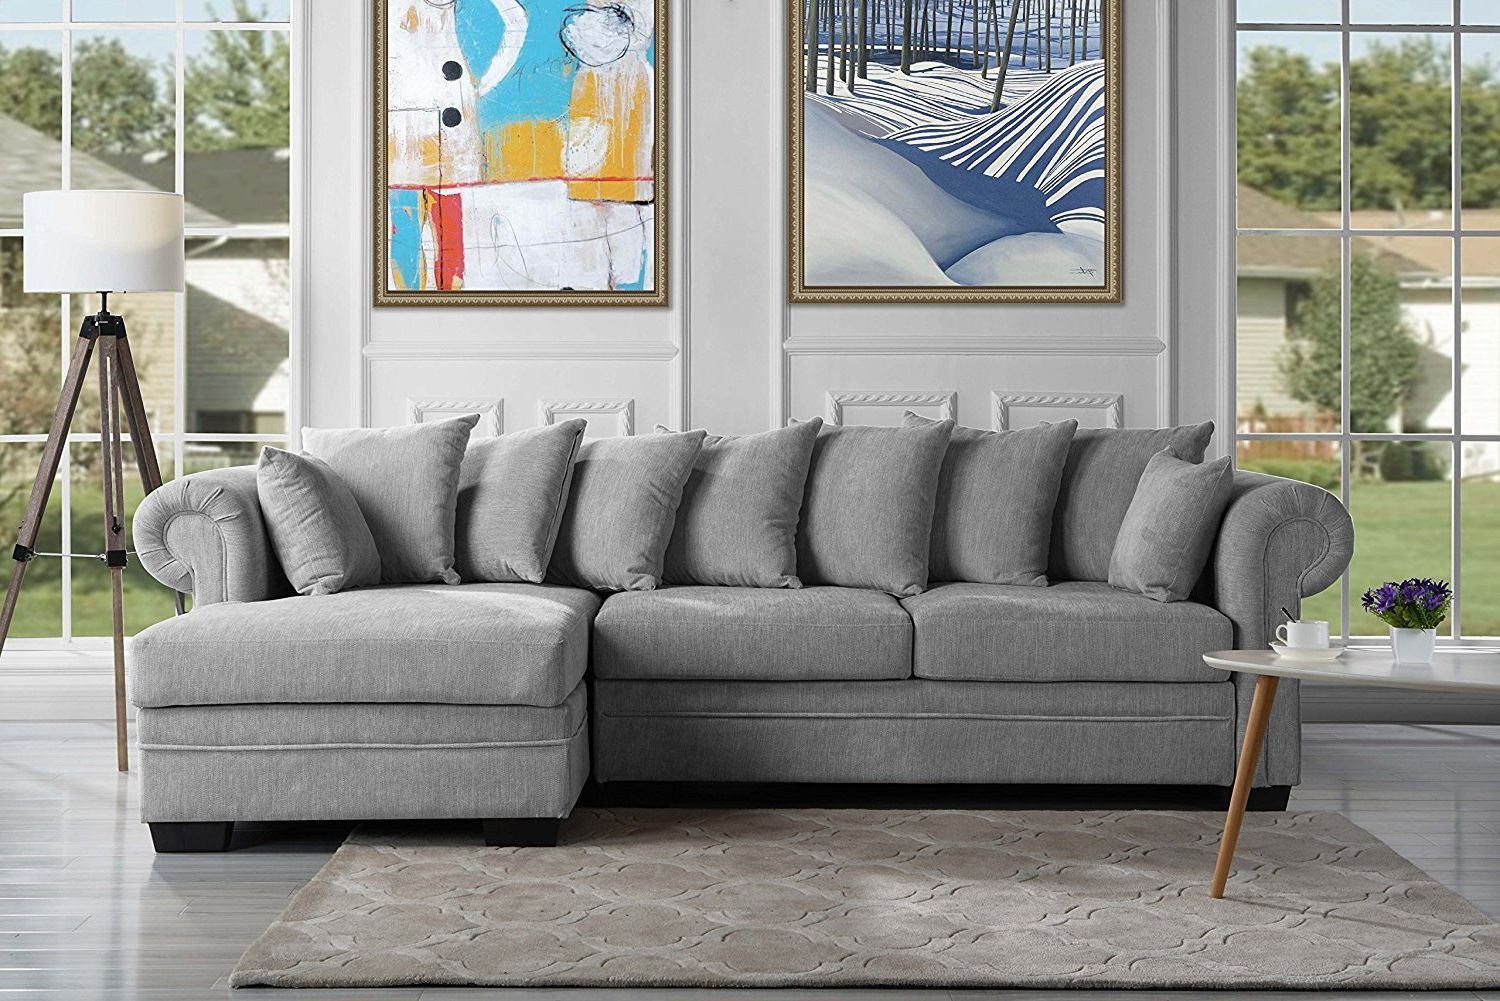 Modern Large Sectional Sofa, L Shape Couch W/ Extra Wide Chaise, Light Within Latest Modern Light Grey Loveseat Sofas (View 5 of 15)